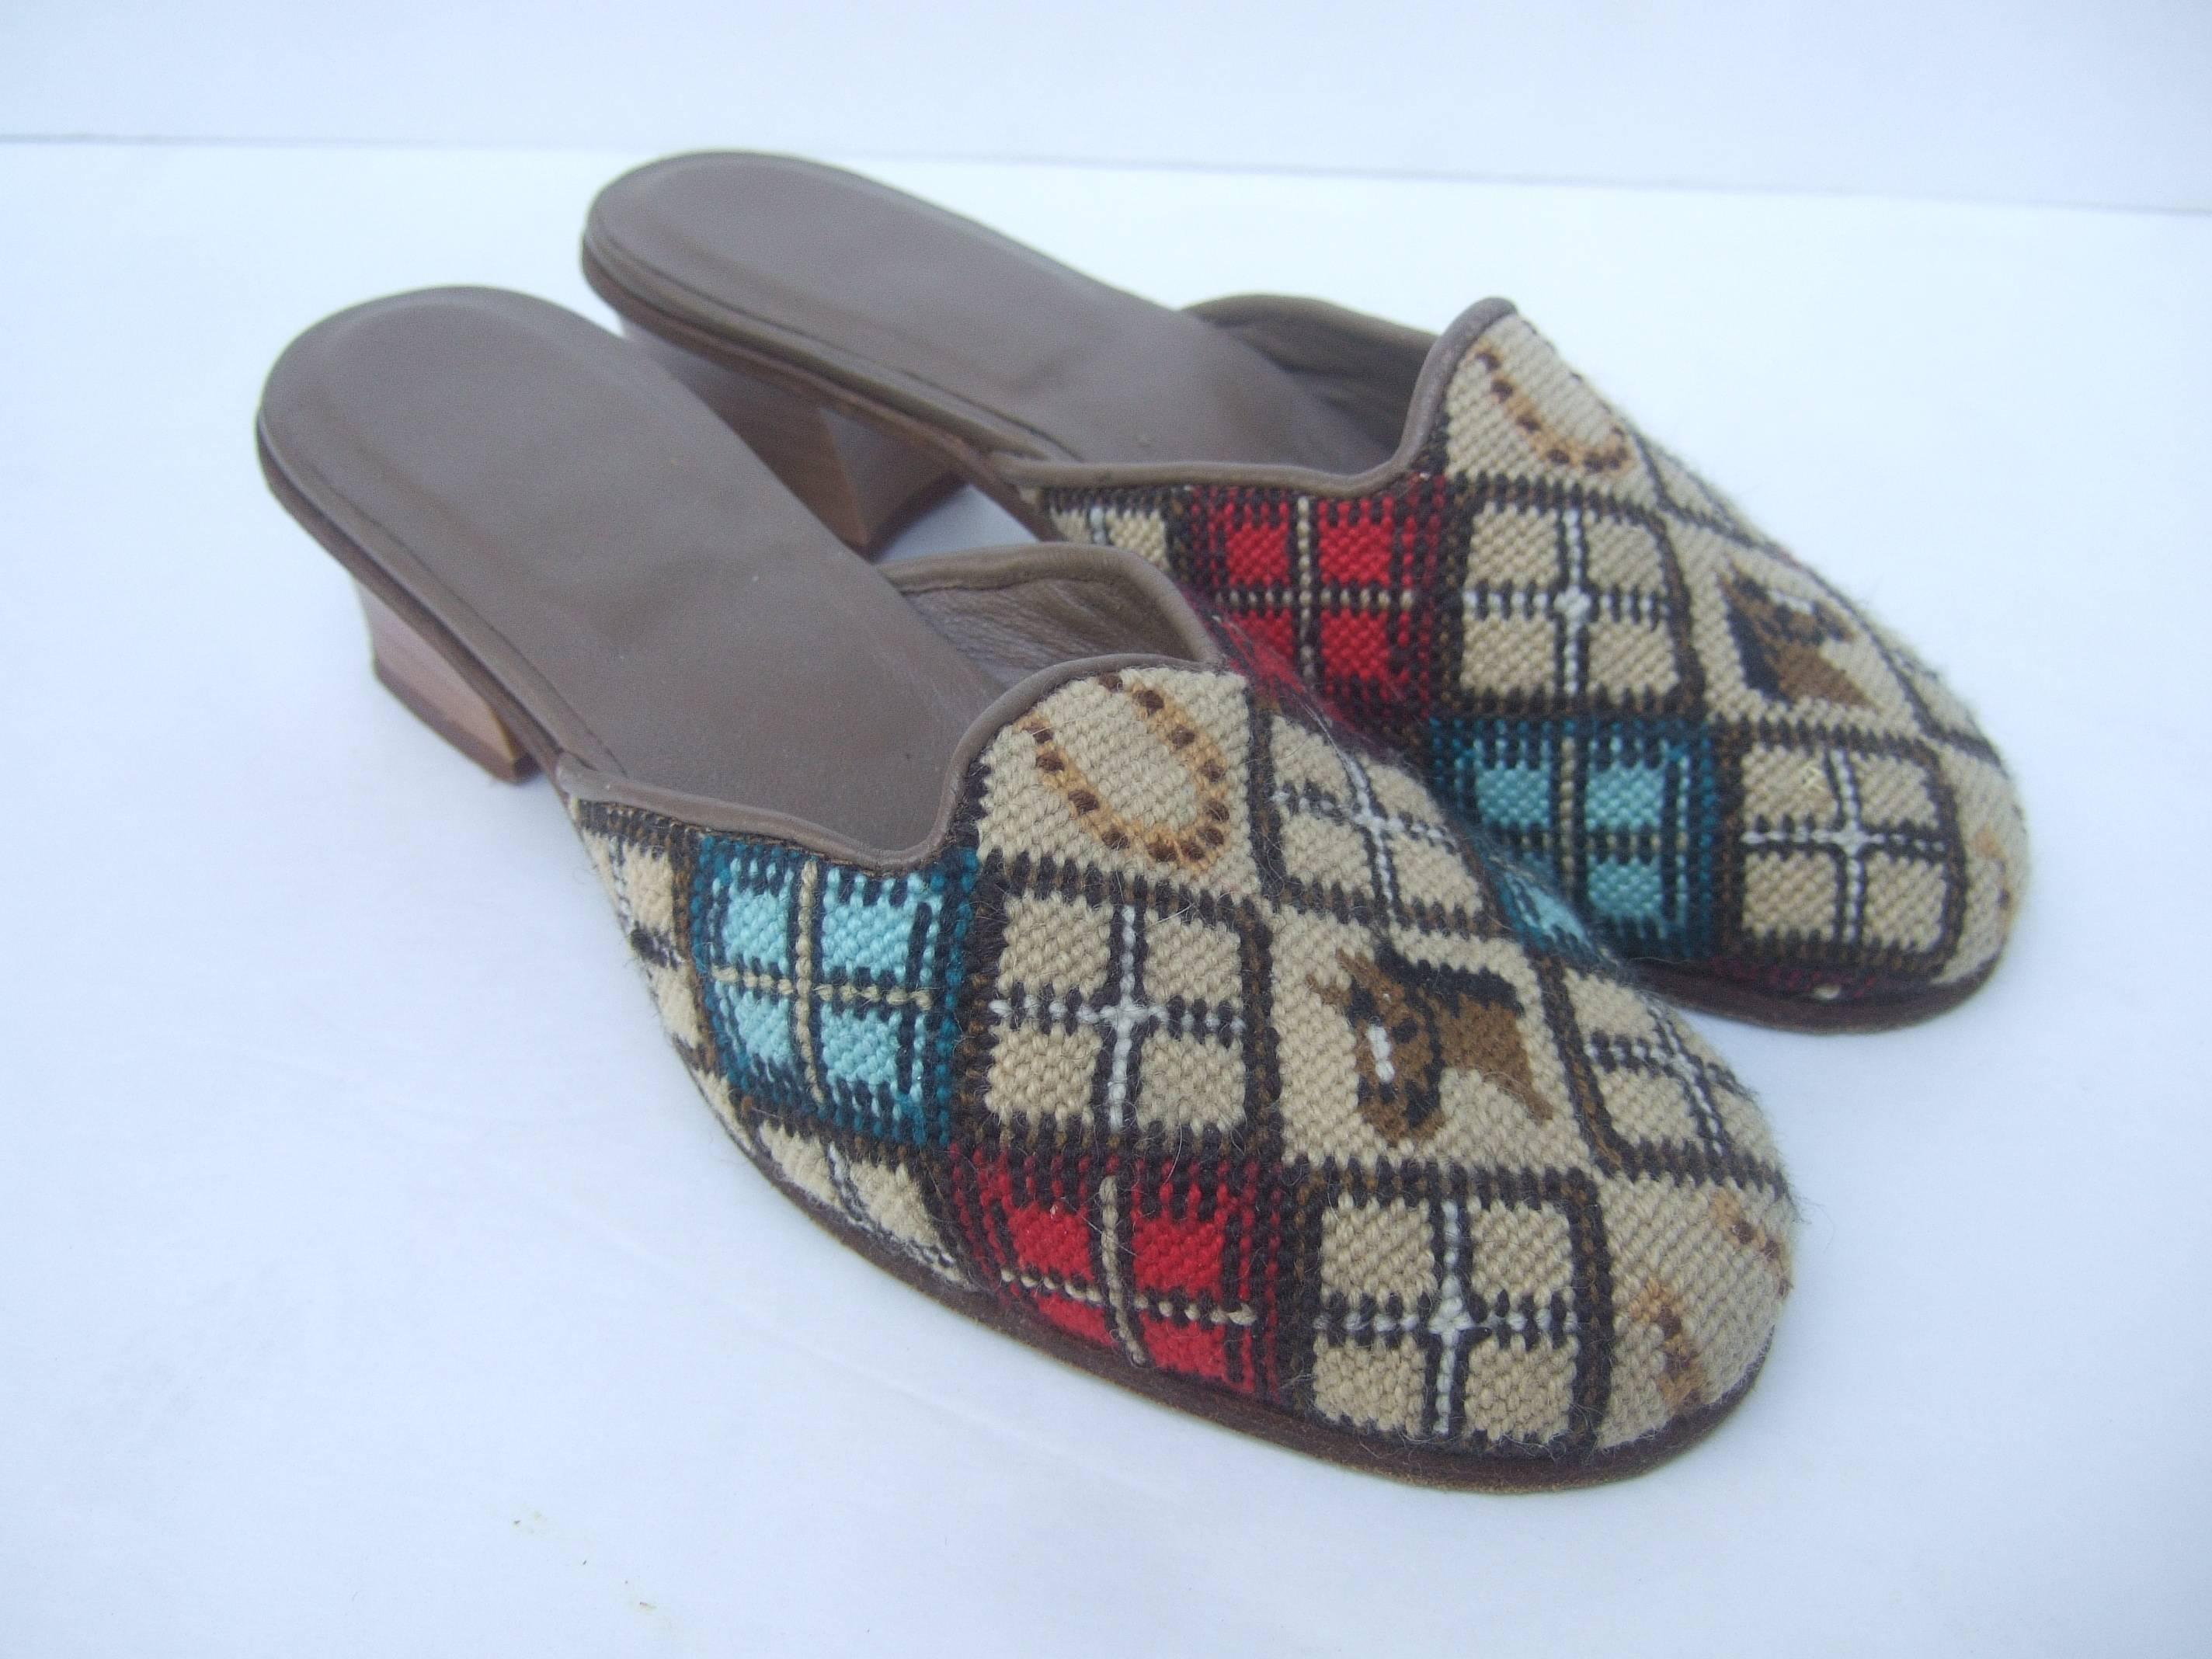 Charming needlepoint equine slipper shoes Made in Italy 
The unique needlepoint shoes are designed
with horse heads and horse shoe figures

Accented with geometric designs interspersed
with the horse head and horse shoe figures

The interior